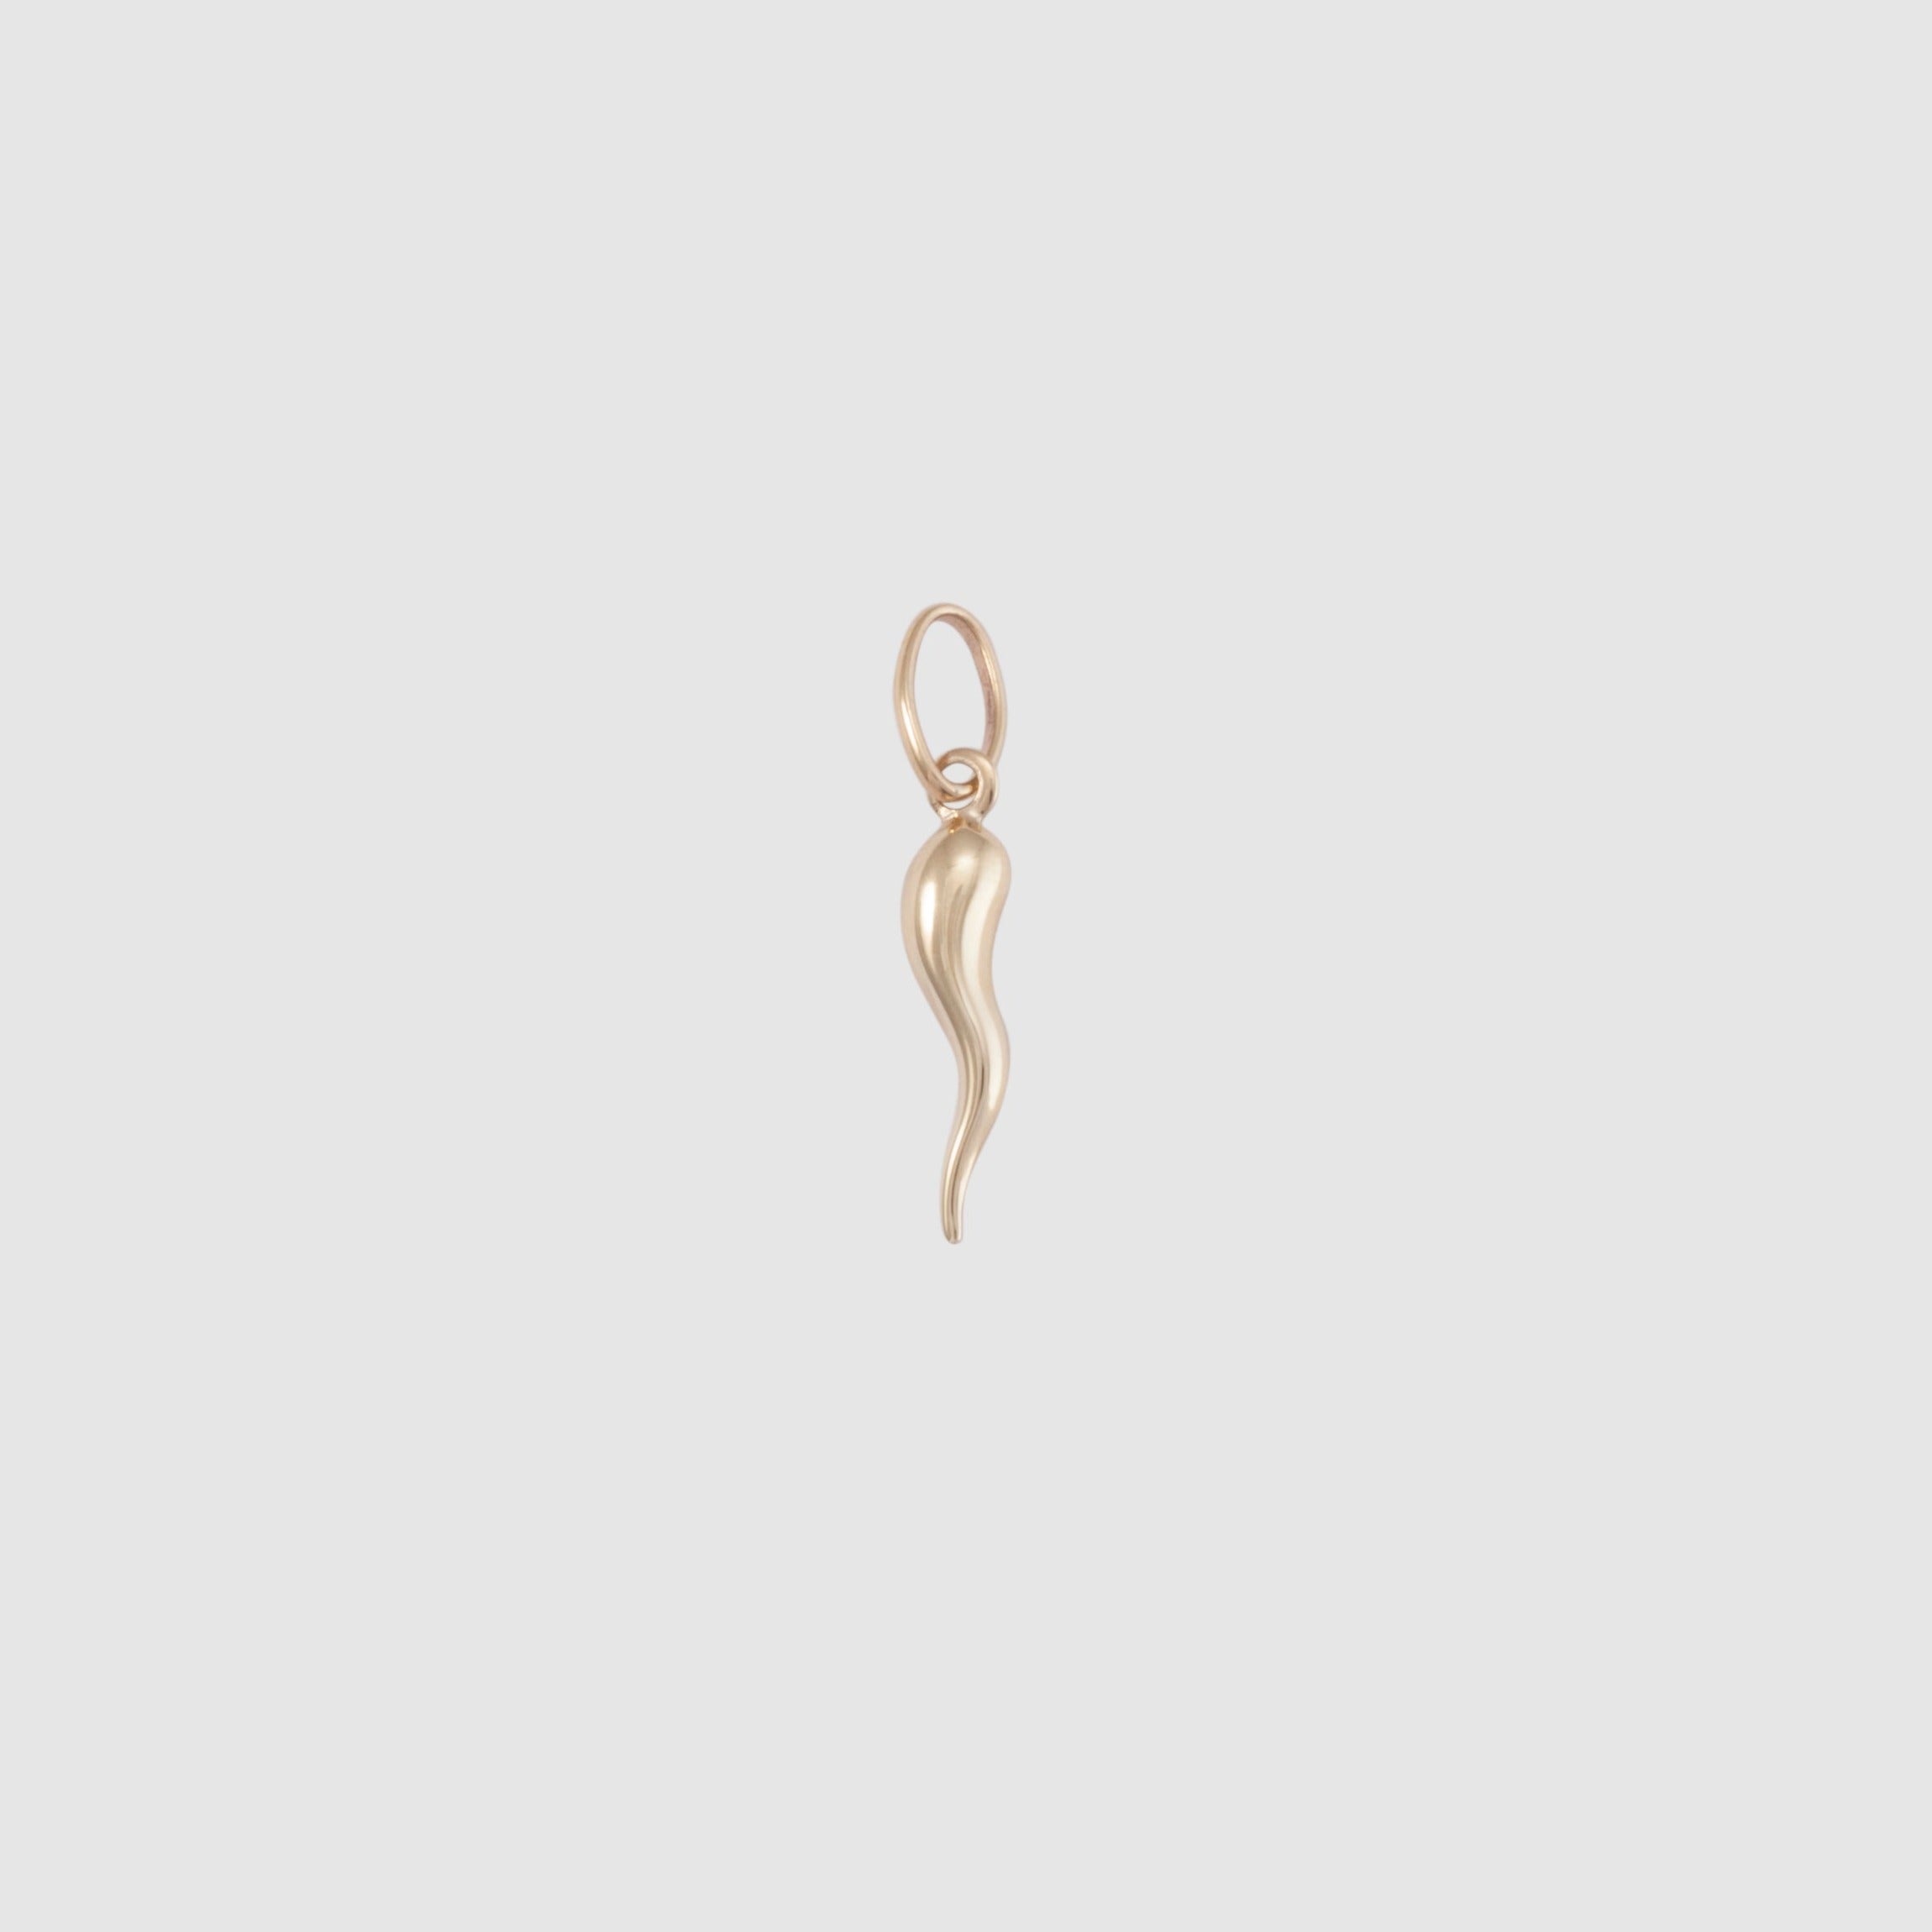 10k solid yellow gold good luck horn charm